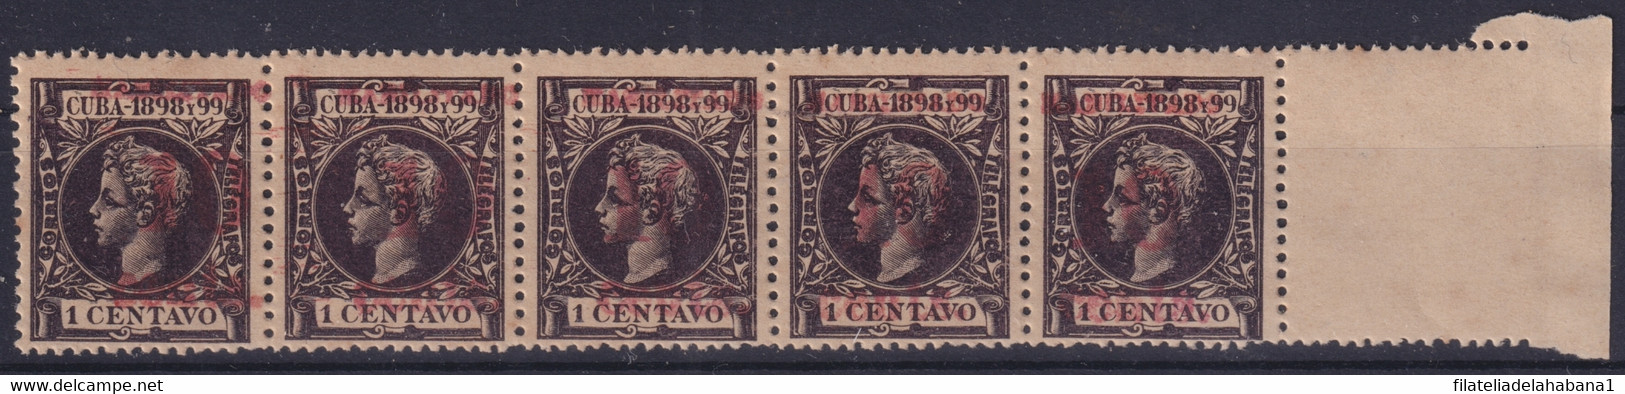 1899-486 CUBA 1899 10c S. 1c US OCCUPATION 4th ISSUE COMPLETE TRIP PHILATELIC FORGERY. - Nuevos